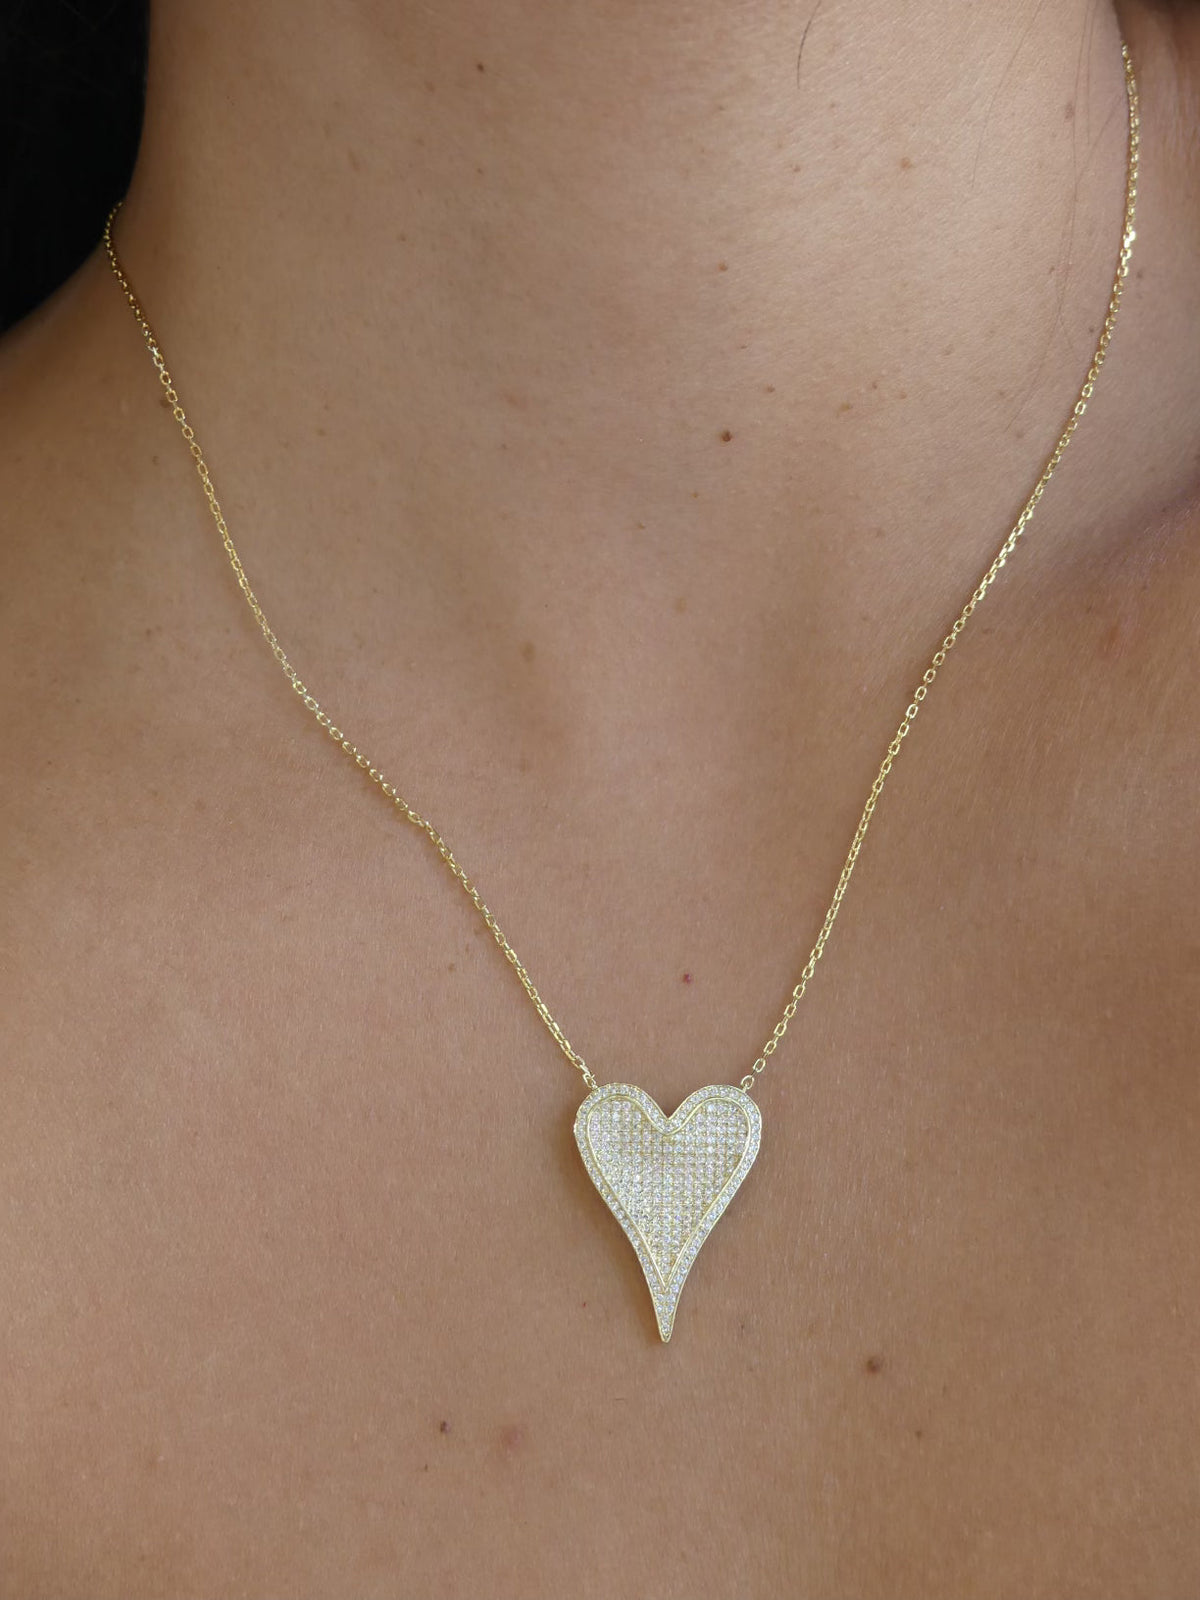 Large heart diamond cz necklace in gold .925 sterling silver gold plate. Sparkly heart necklace by Kesley Boutique